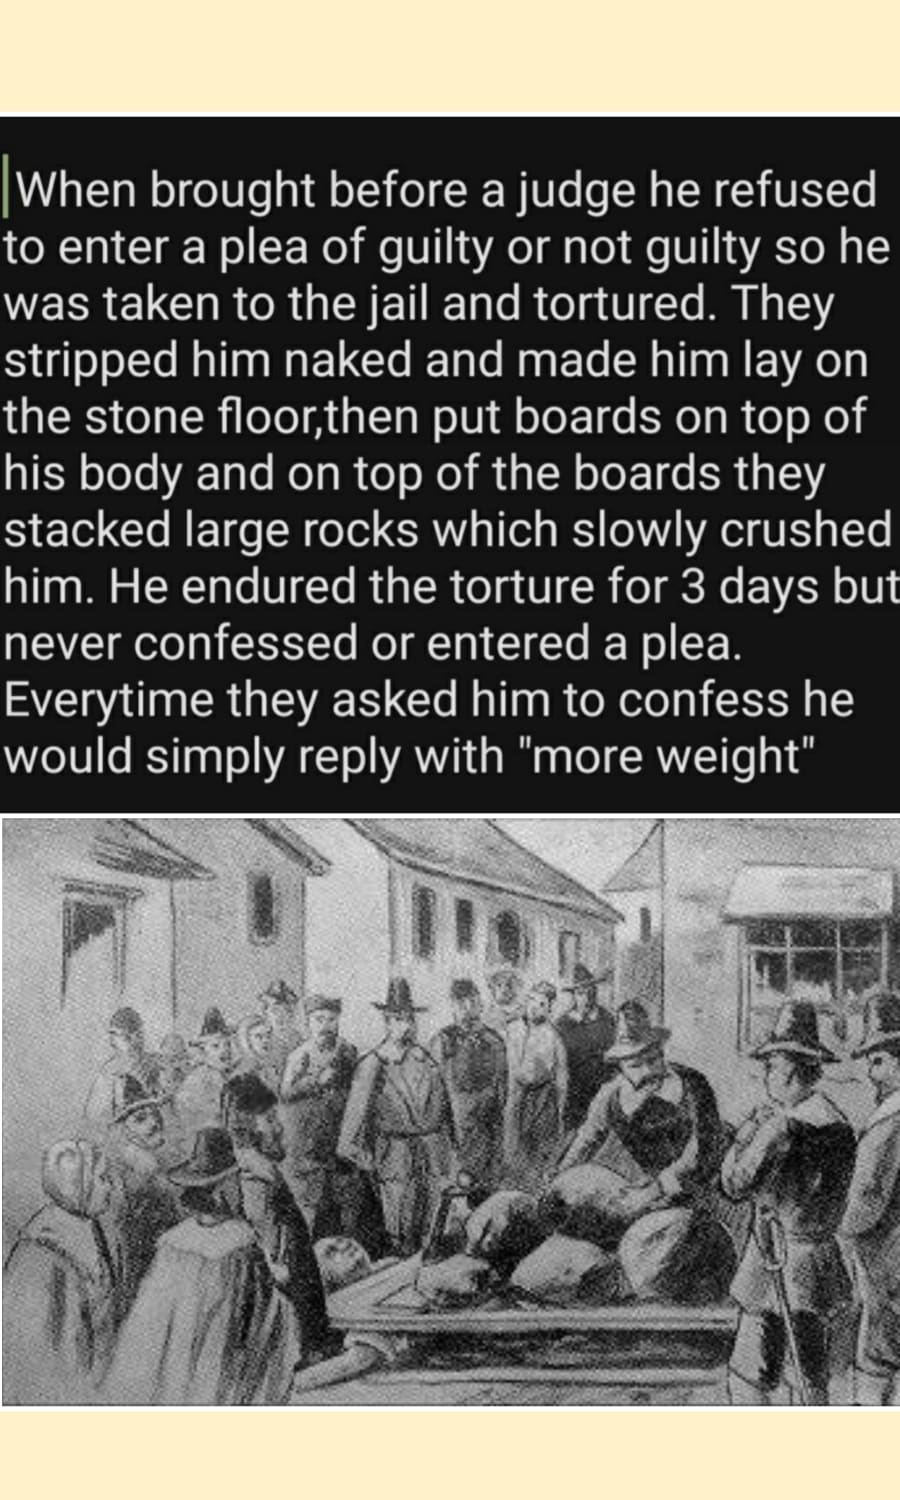 Giles Corey was an 81 year old man who was accused of being a witch during the Salem witch trials.